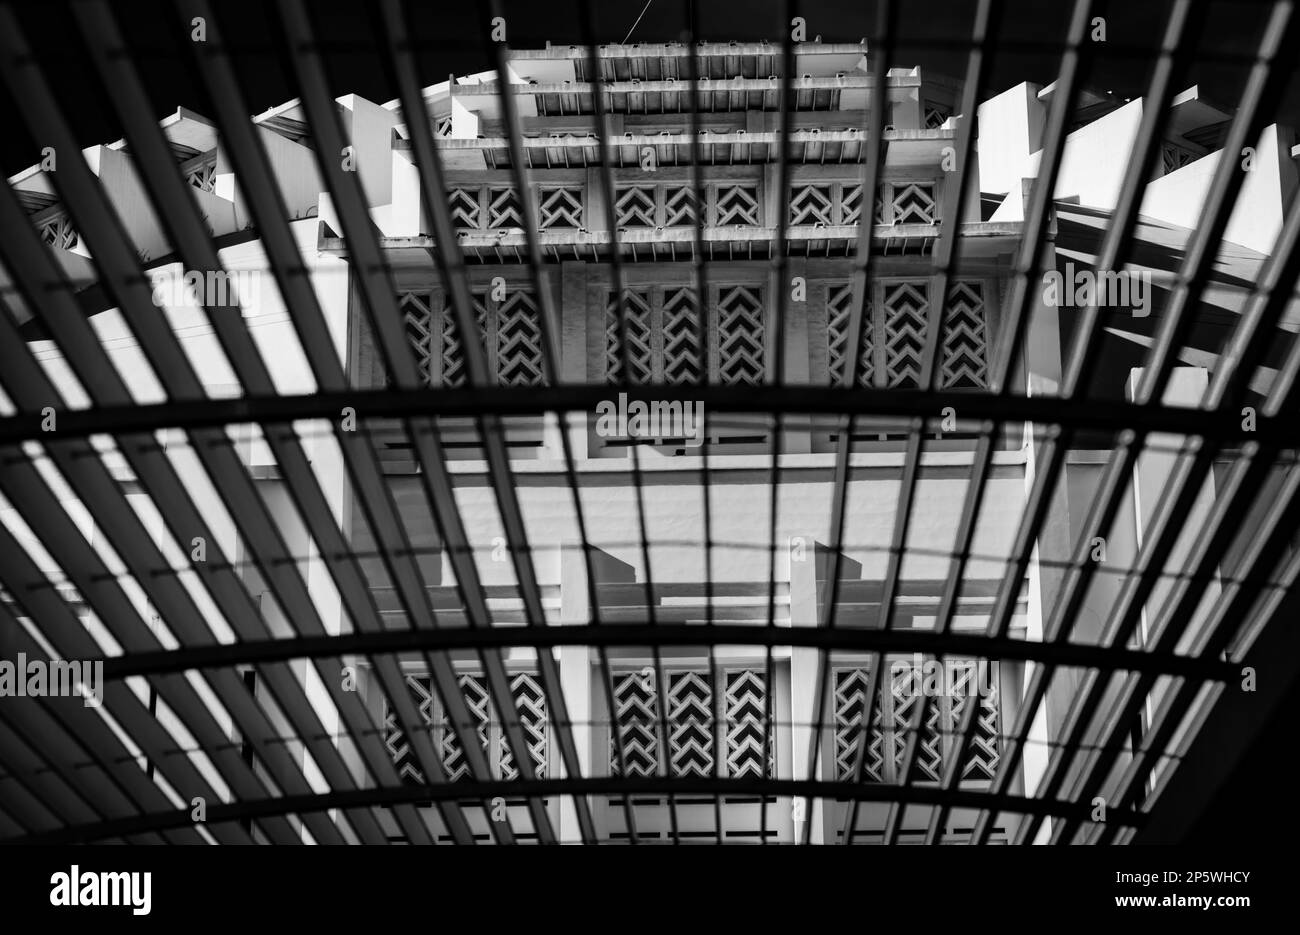 An abstract b&w view of the front of the landmark art deco style Central Market in Phnom Penh, Cambodia. Stock Photo